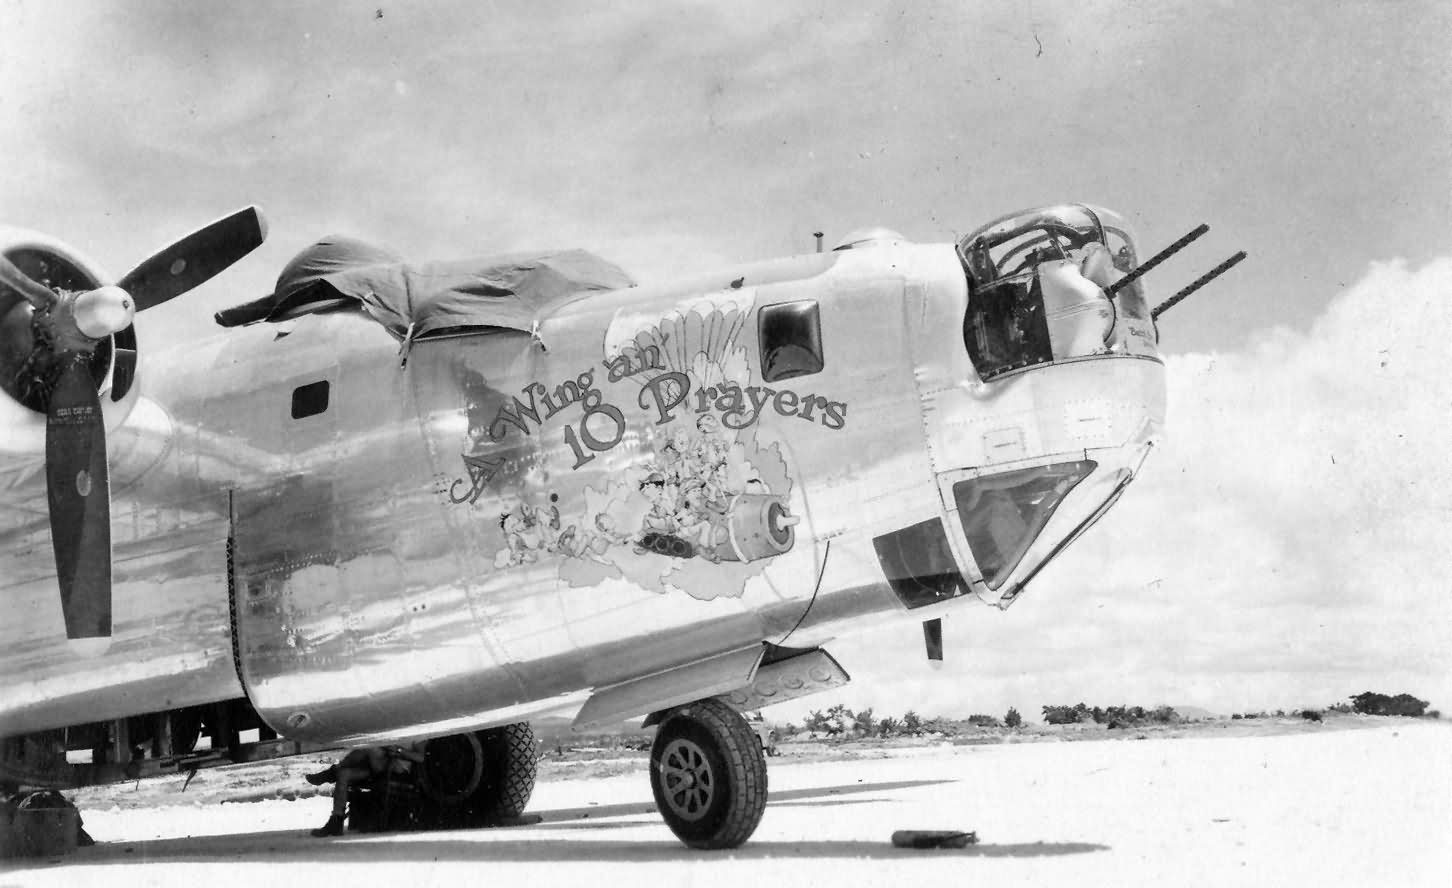 B-24M Liberator 44-42378 of the 380th Bomb Group - Nose art A "Wing an...